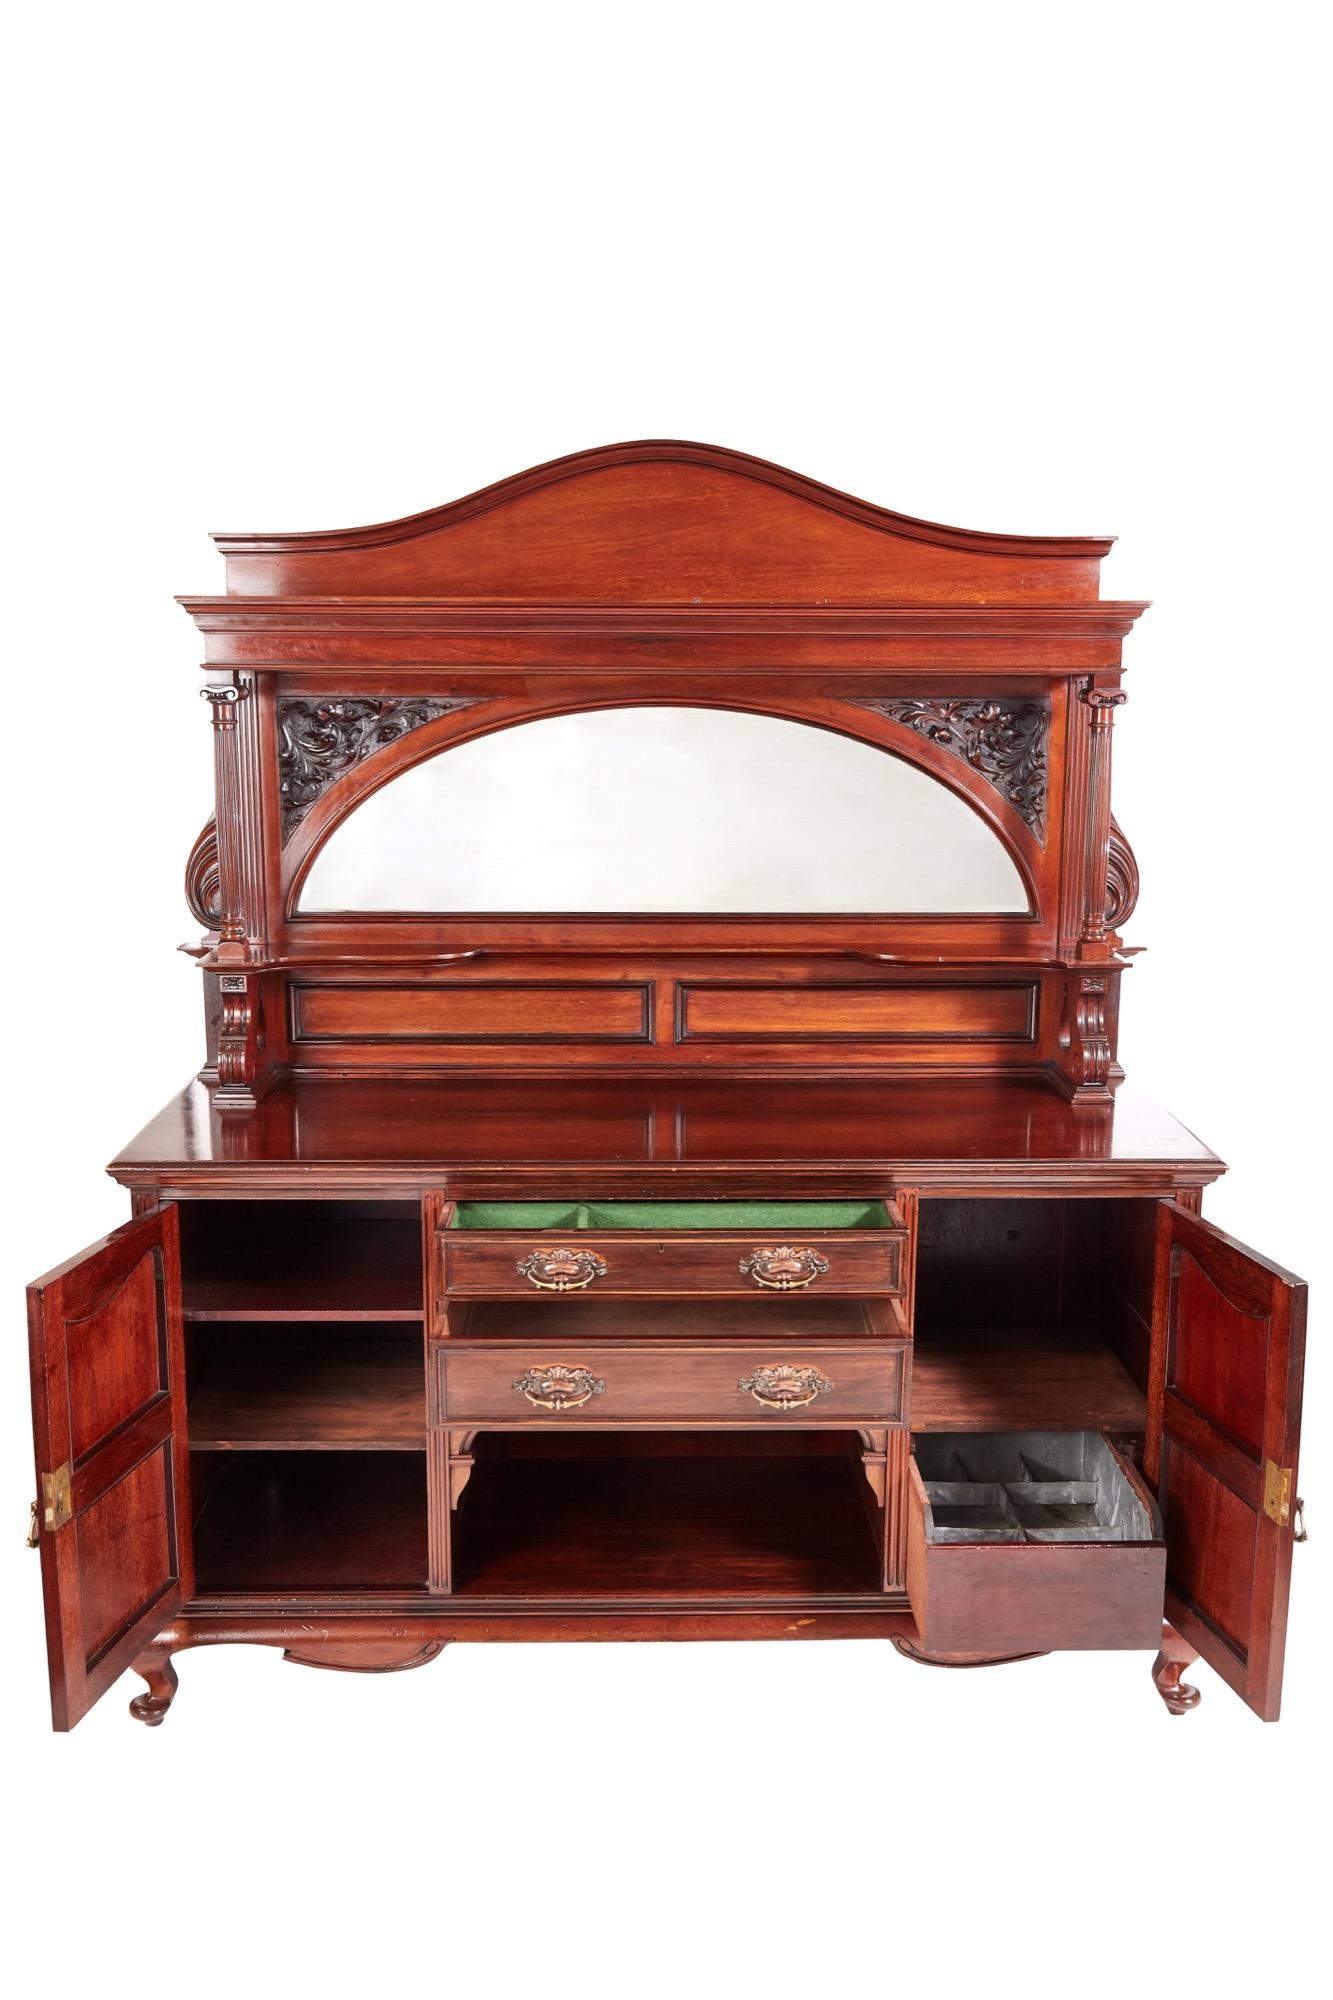 This is a large quality antique carved mahogany sideboard by Maple & Co. It boasts an attractive arched mirrored back with projecting flanking fluted columns. The striking base has two central drawers and recessed shelf below flanked by a pair of